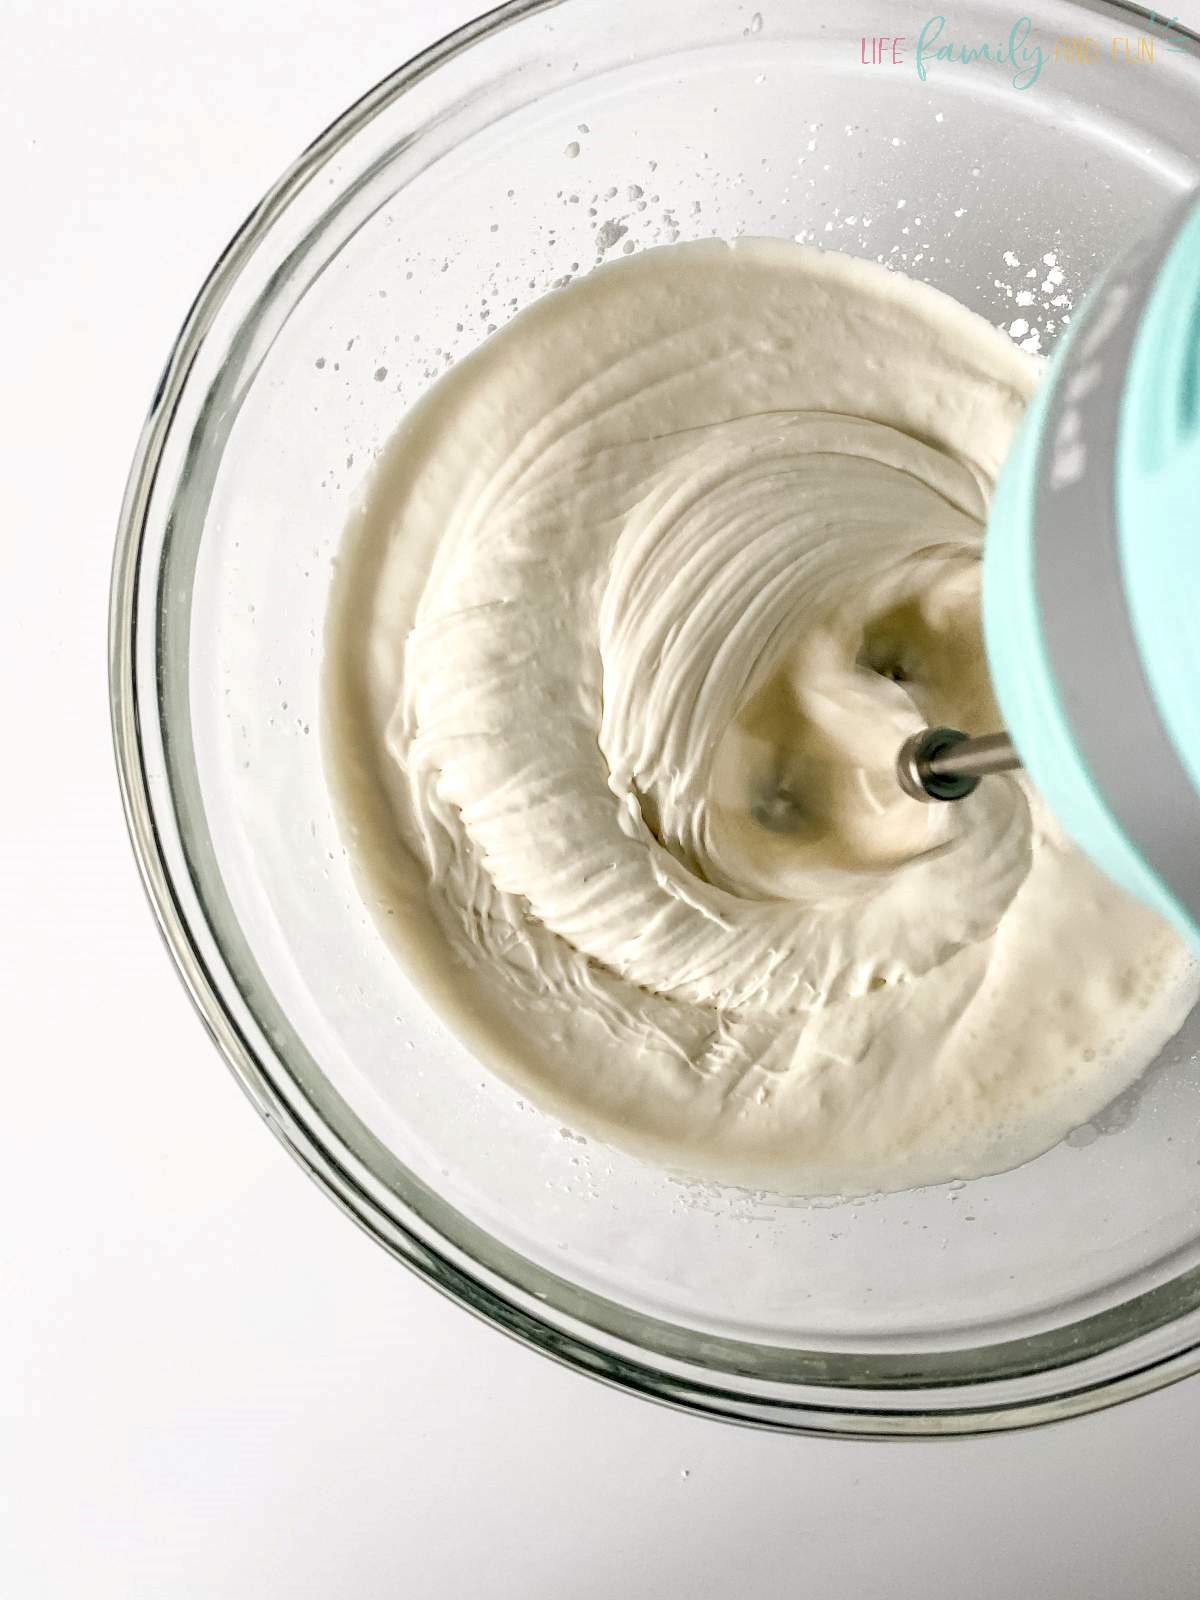 Homemade whipped cream - INGREDIENTS - mix